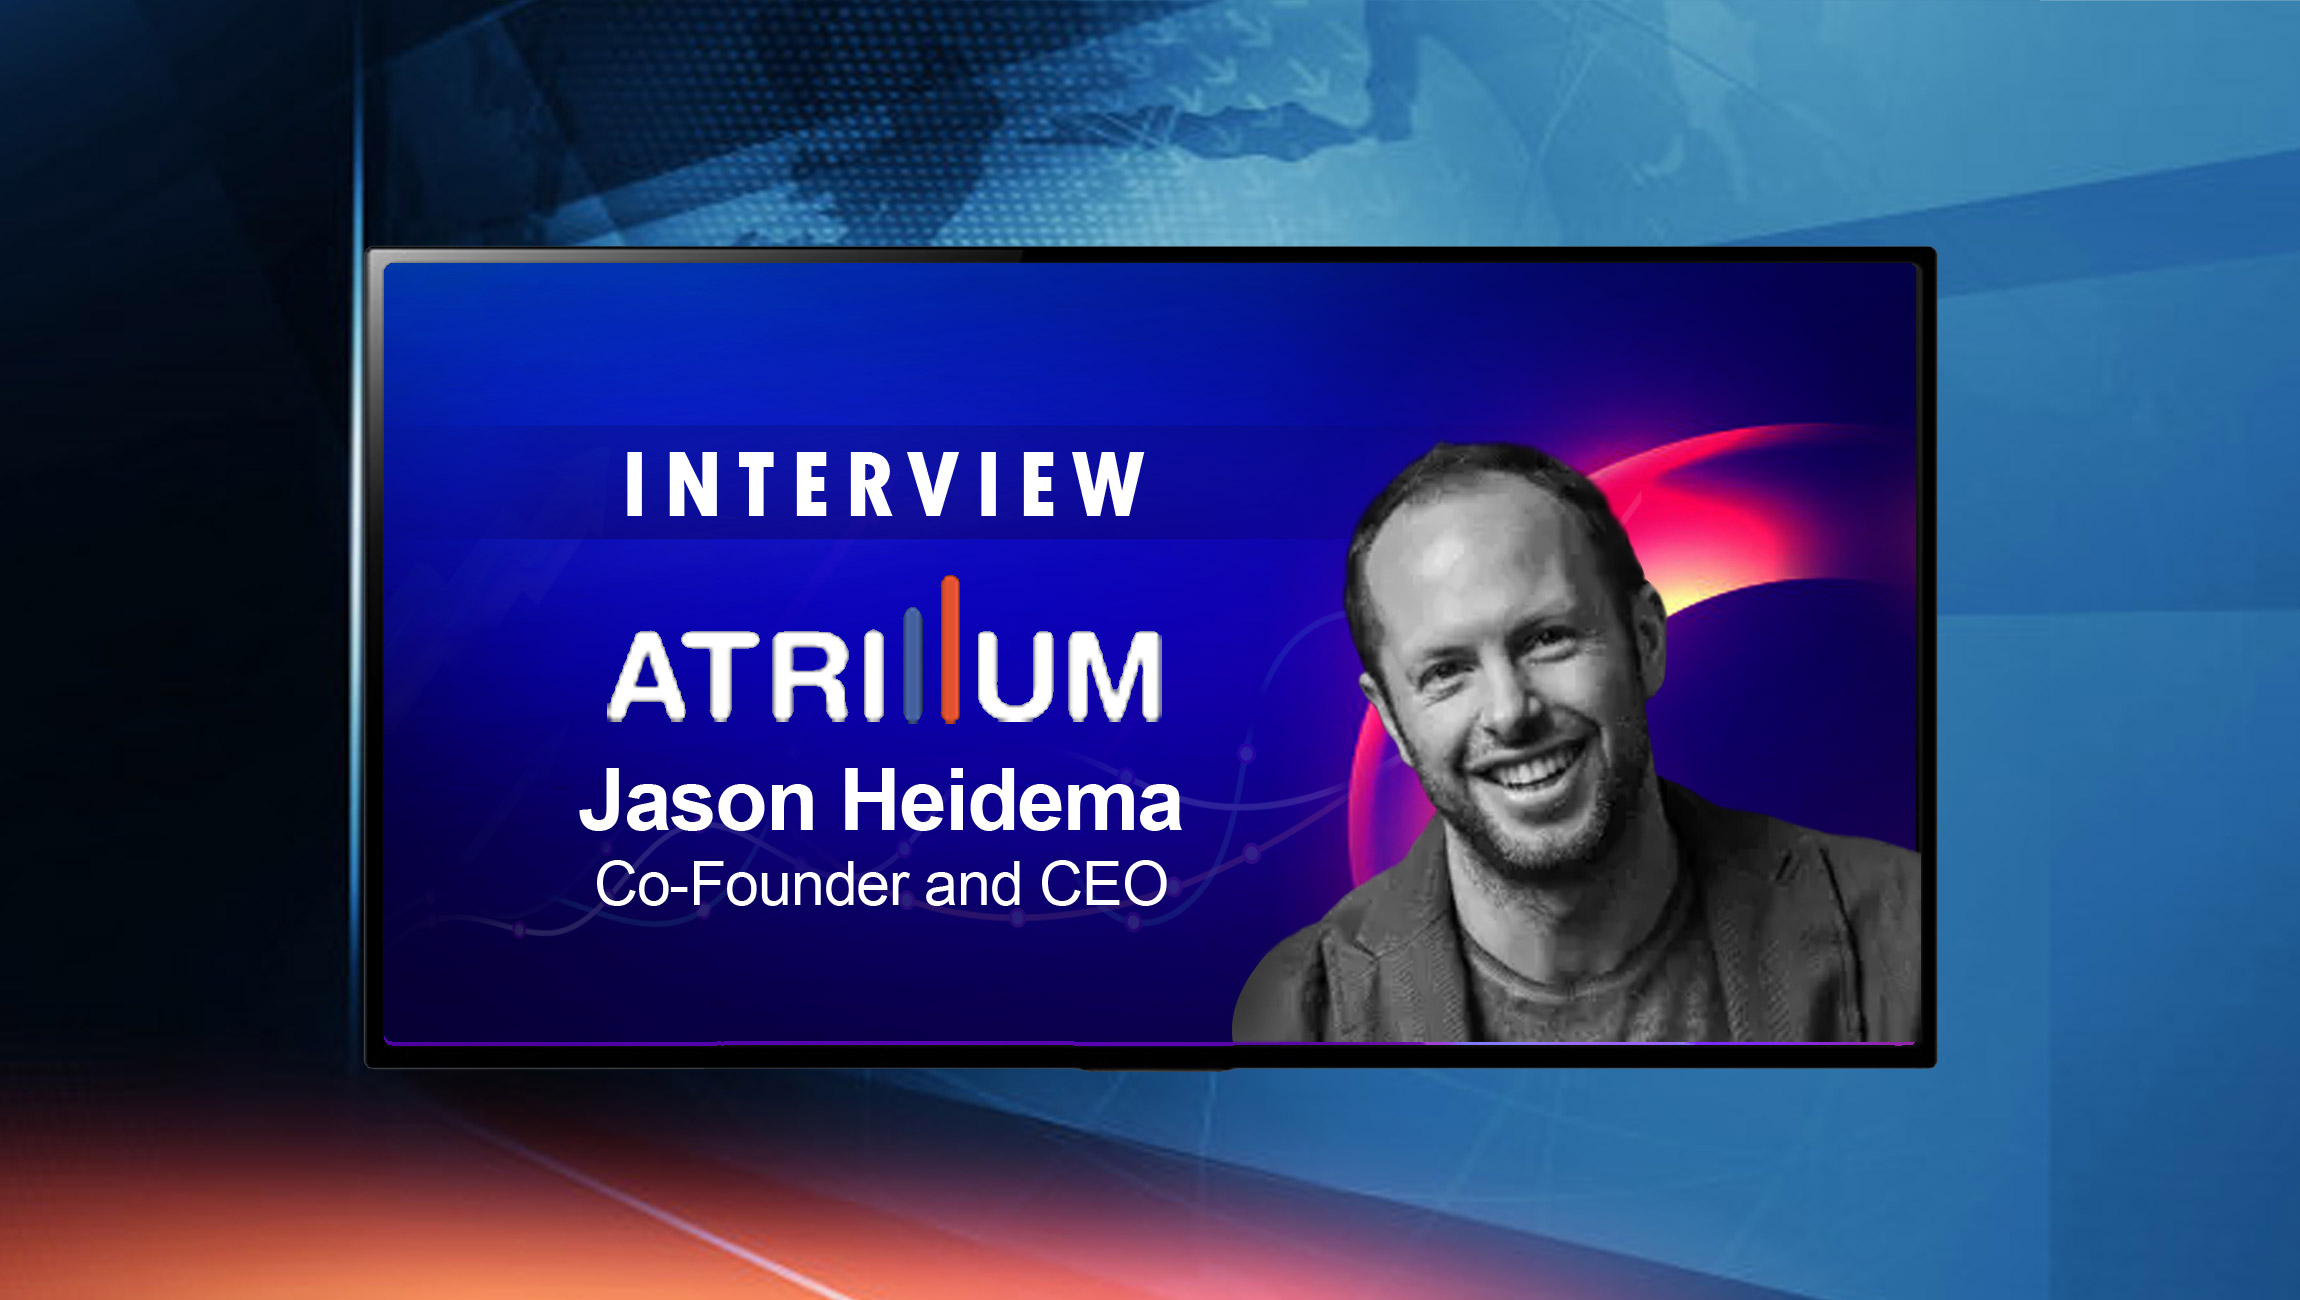 SalesTechStar Interview with Jason Heidema, Co-Founder and CEO at Atrium